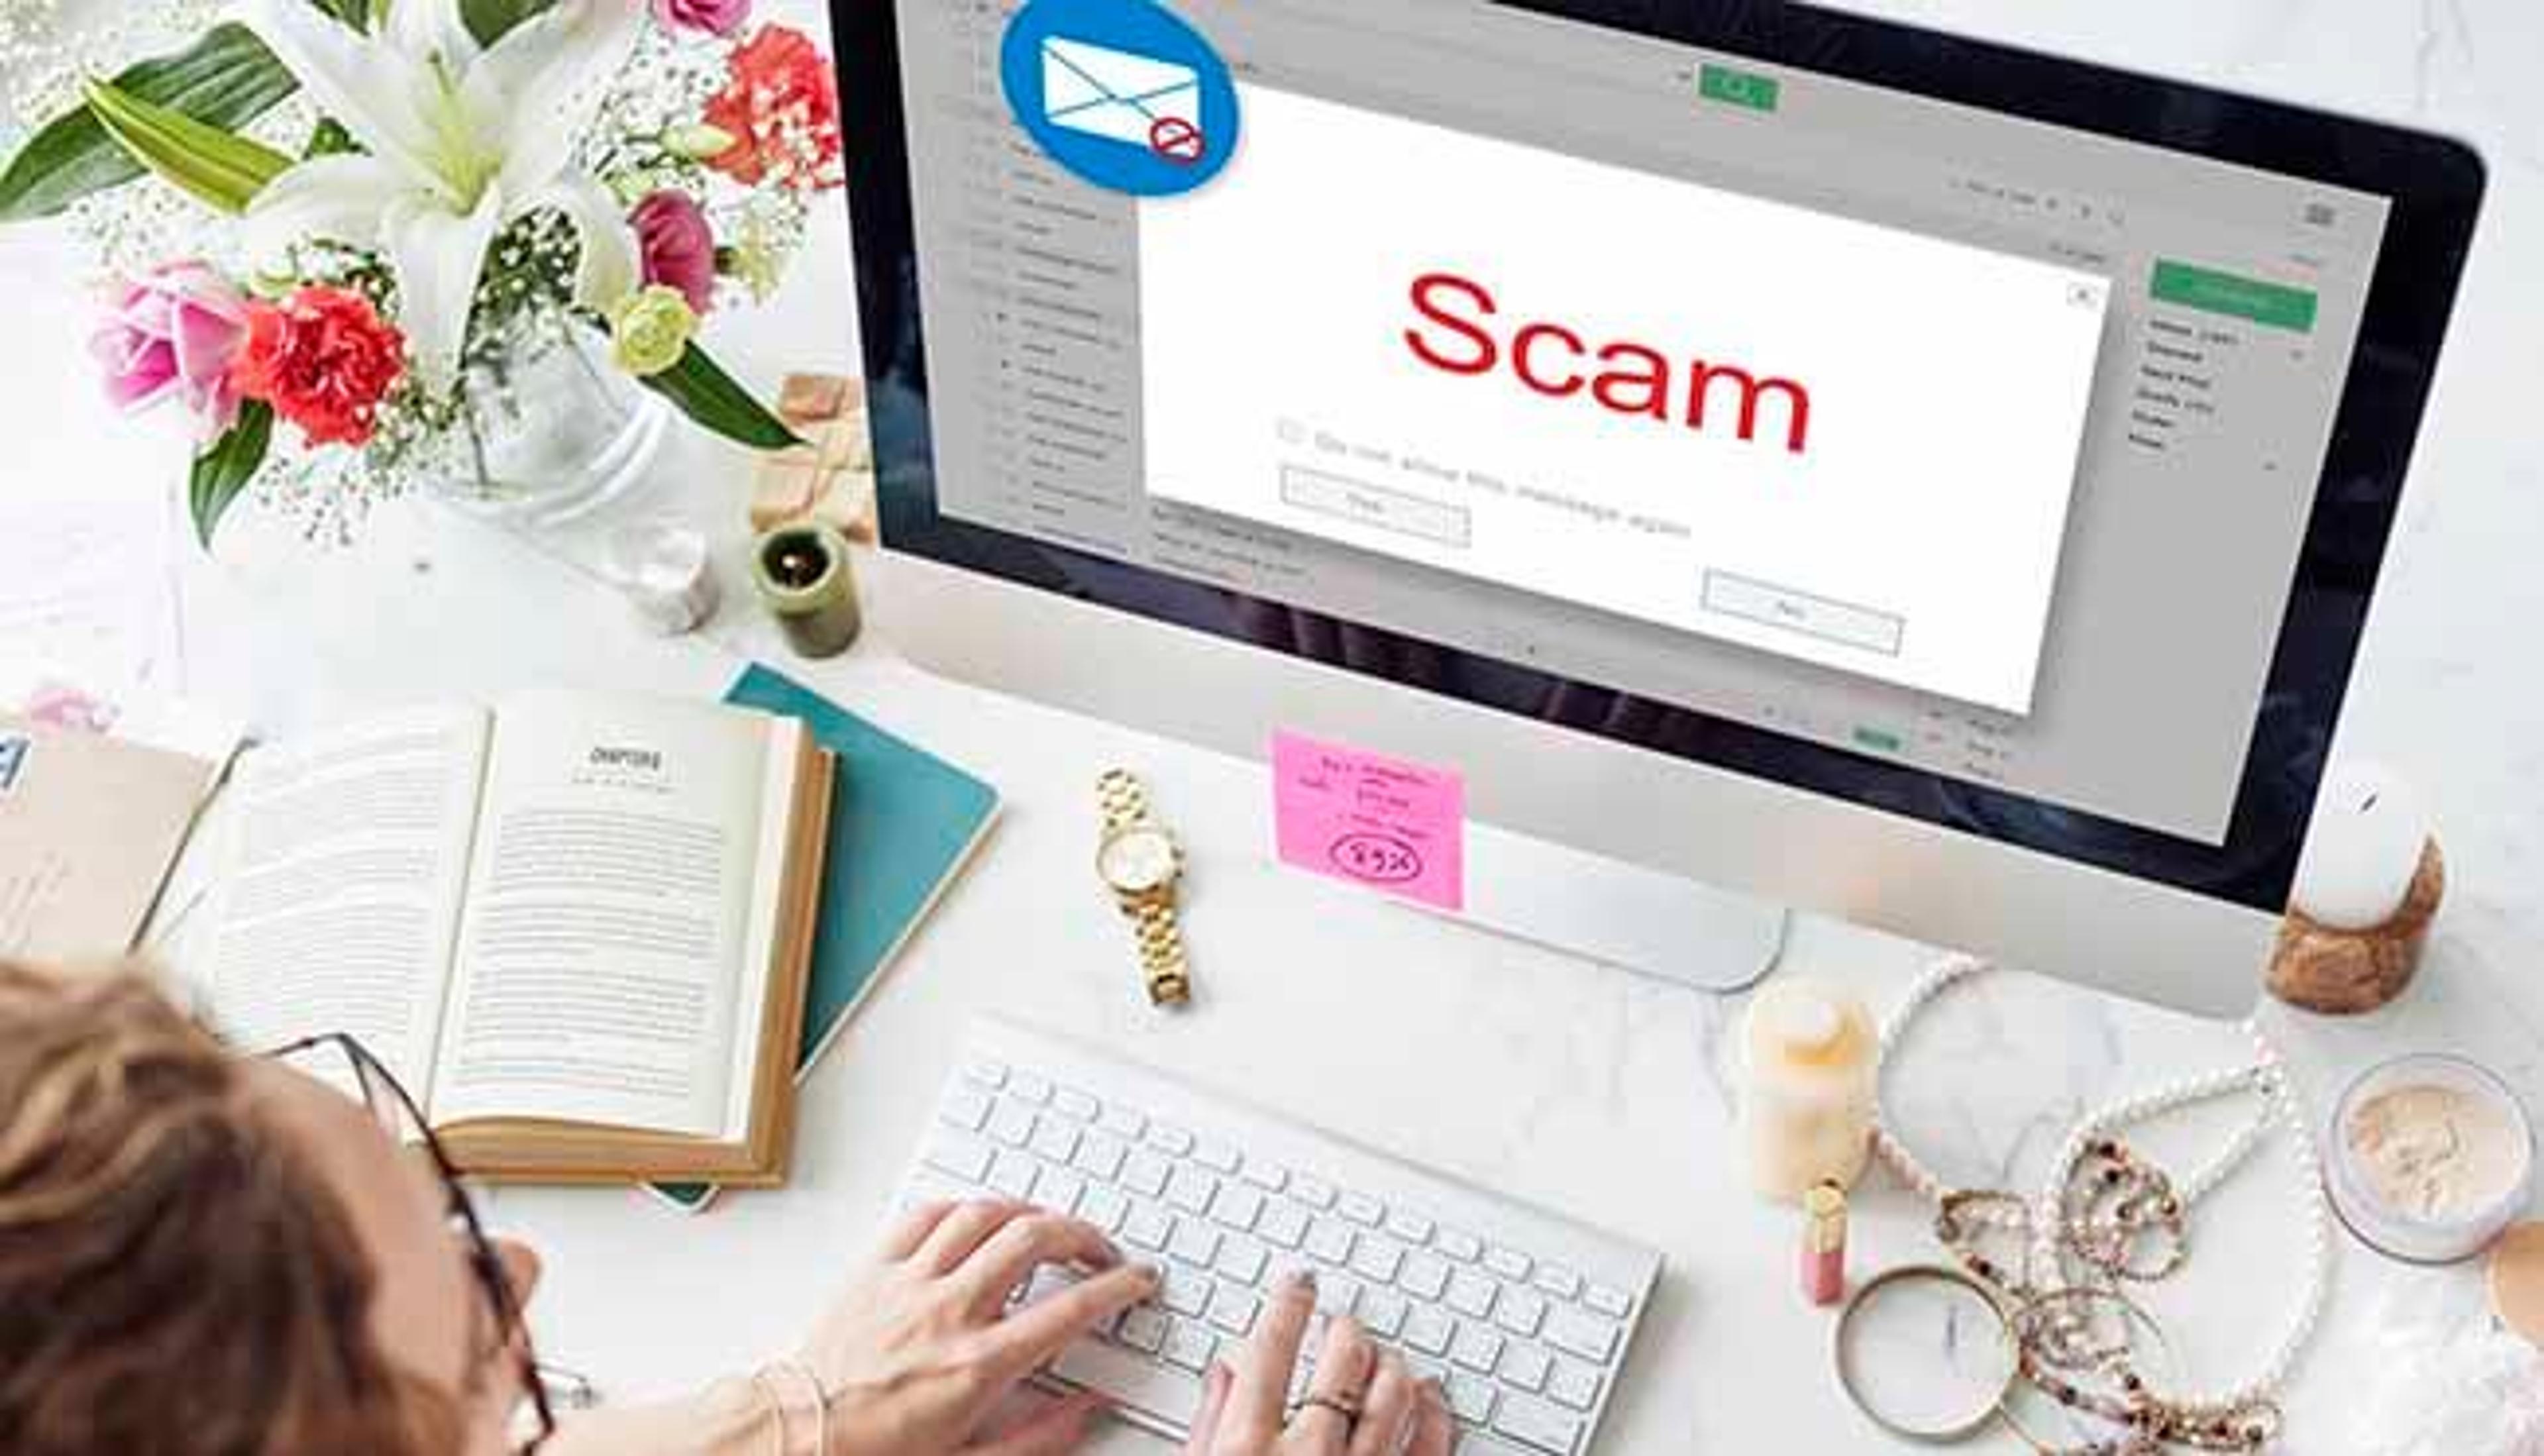 What Do Upwork Scams Look Like? Learn How To Protect Yourself